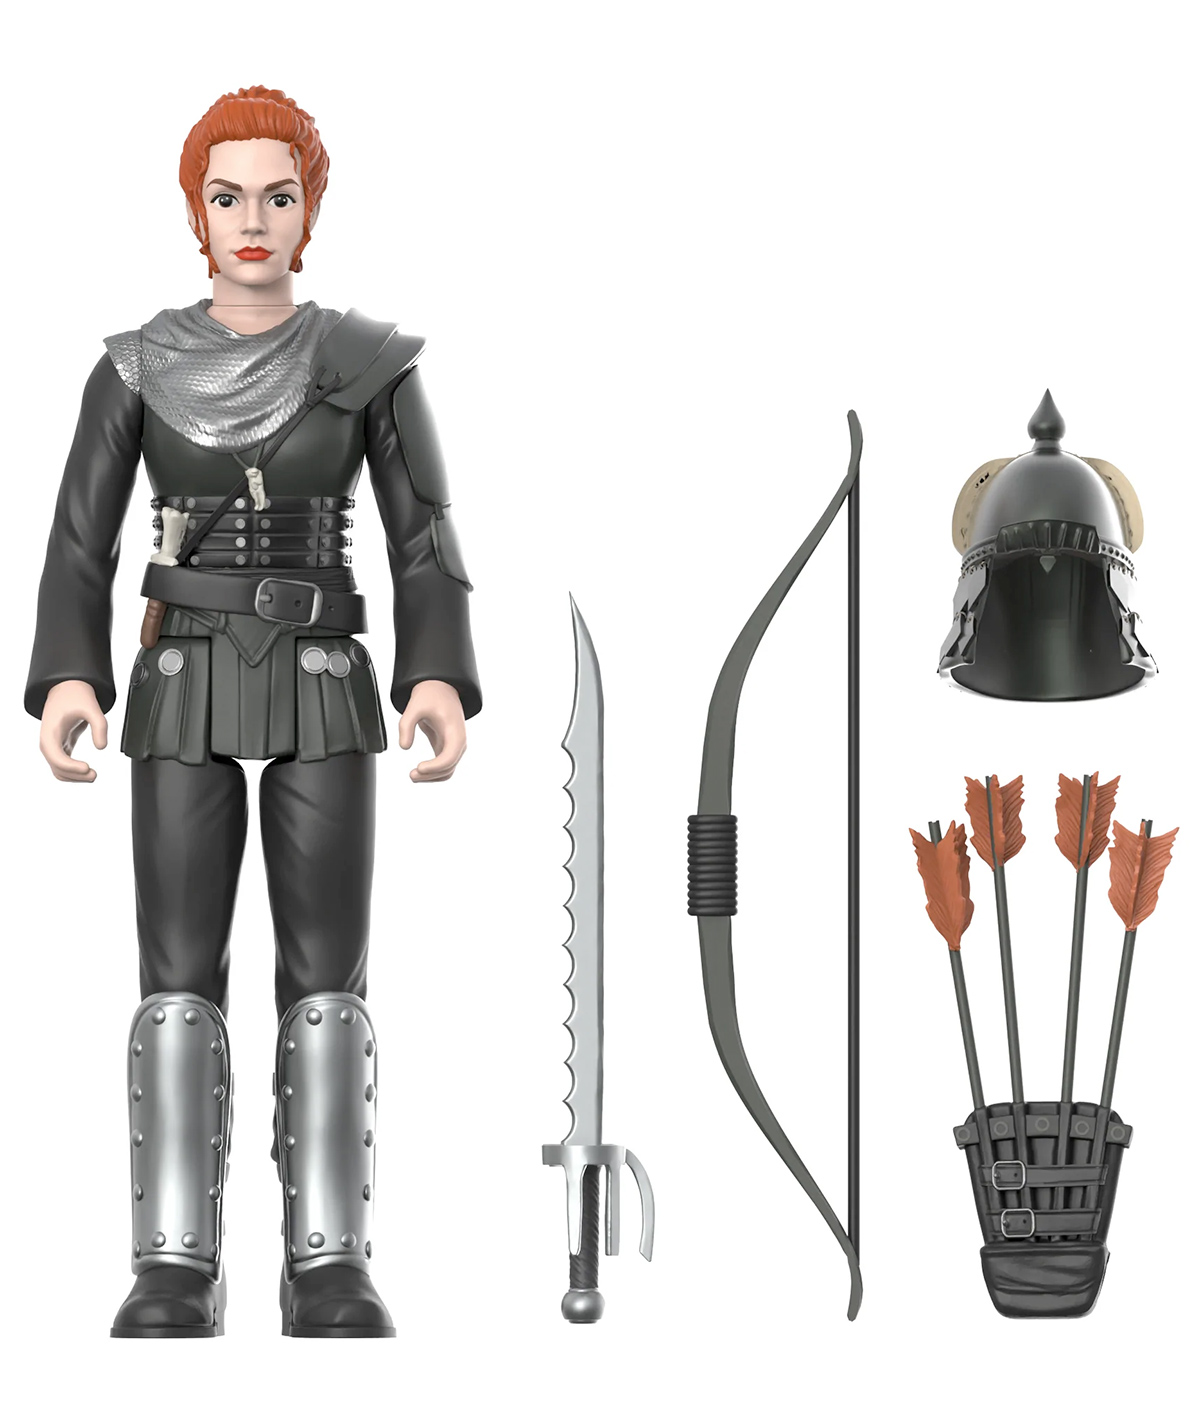 Willow Movie ReAction Figures Wave 2